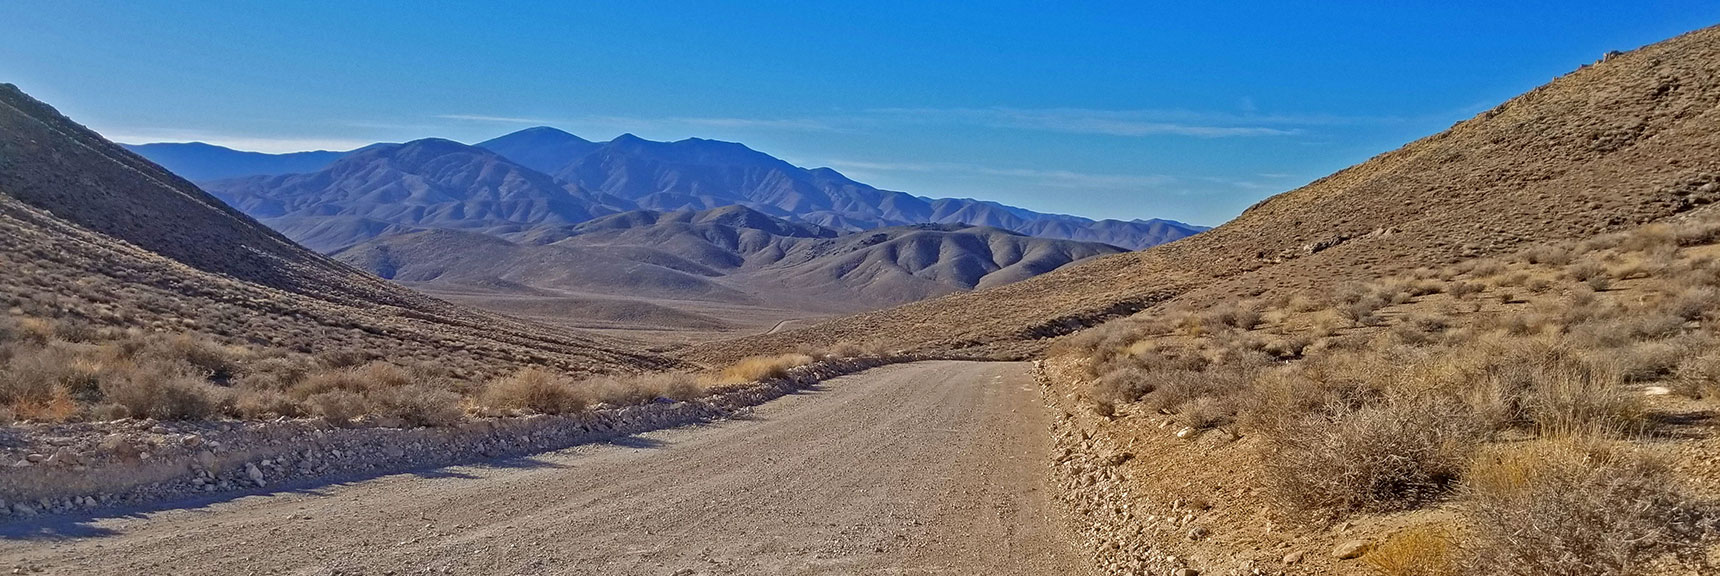 Looking Back Down the Approach Road Toward Telescope Peak Area | Skidoo Stamp Mill, Panamint Mountains, Death Valley National Park, CA